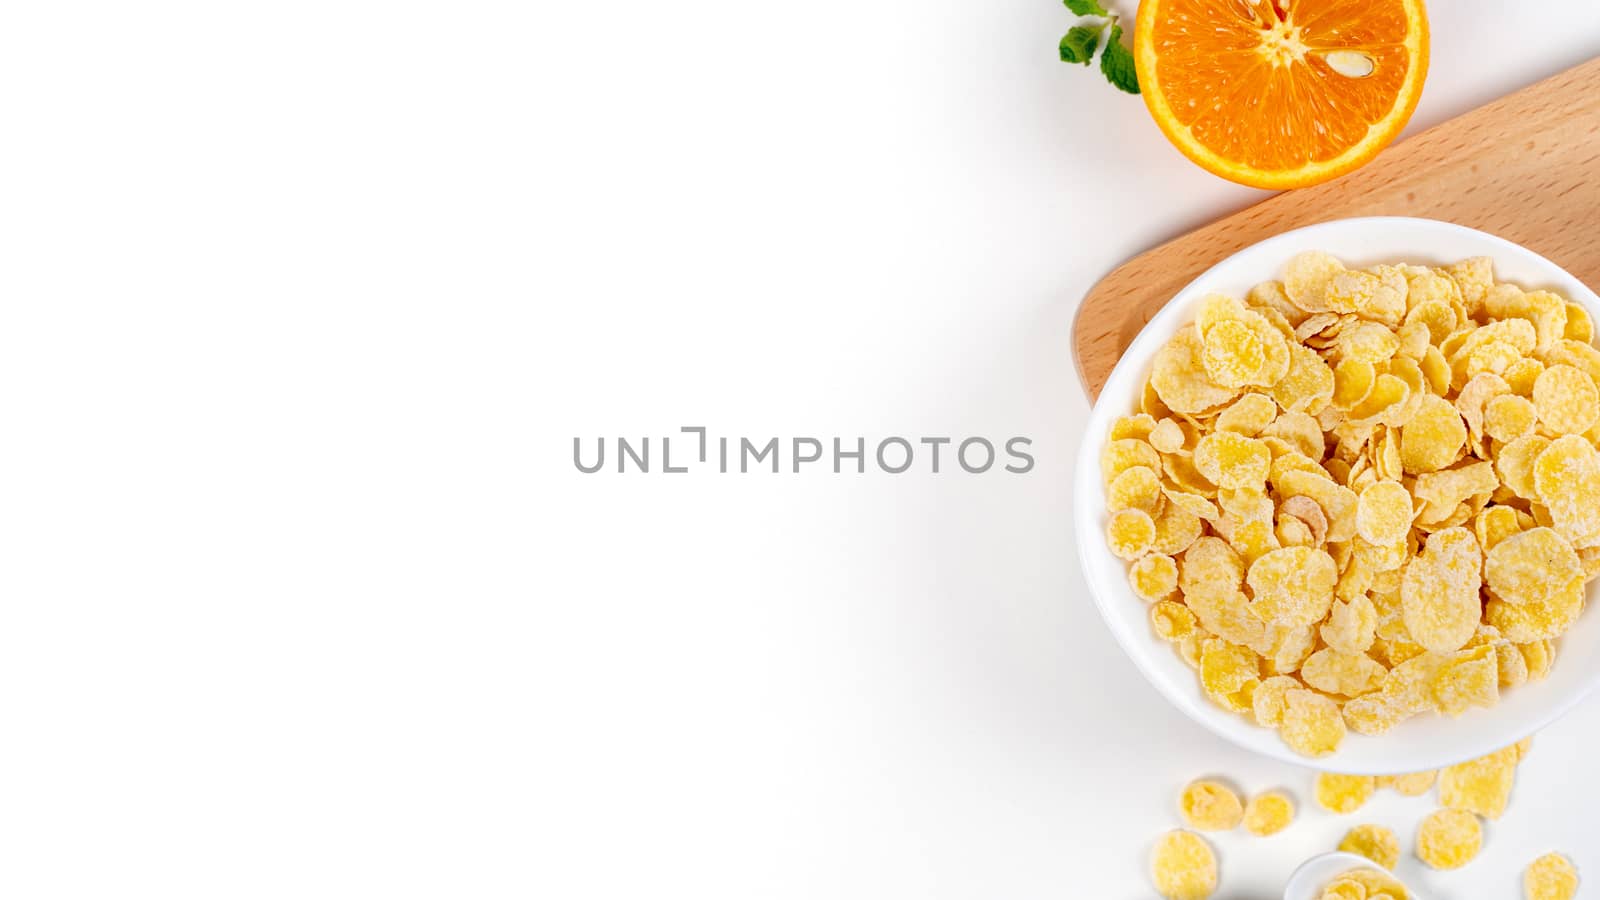 Corn flakes bowl sweeties with milk and orange on white background, top view, flat lay overhead layout, fresh and healthy breakfast design concept.